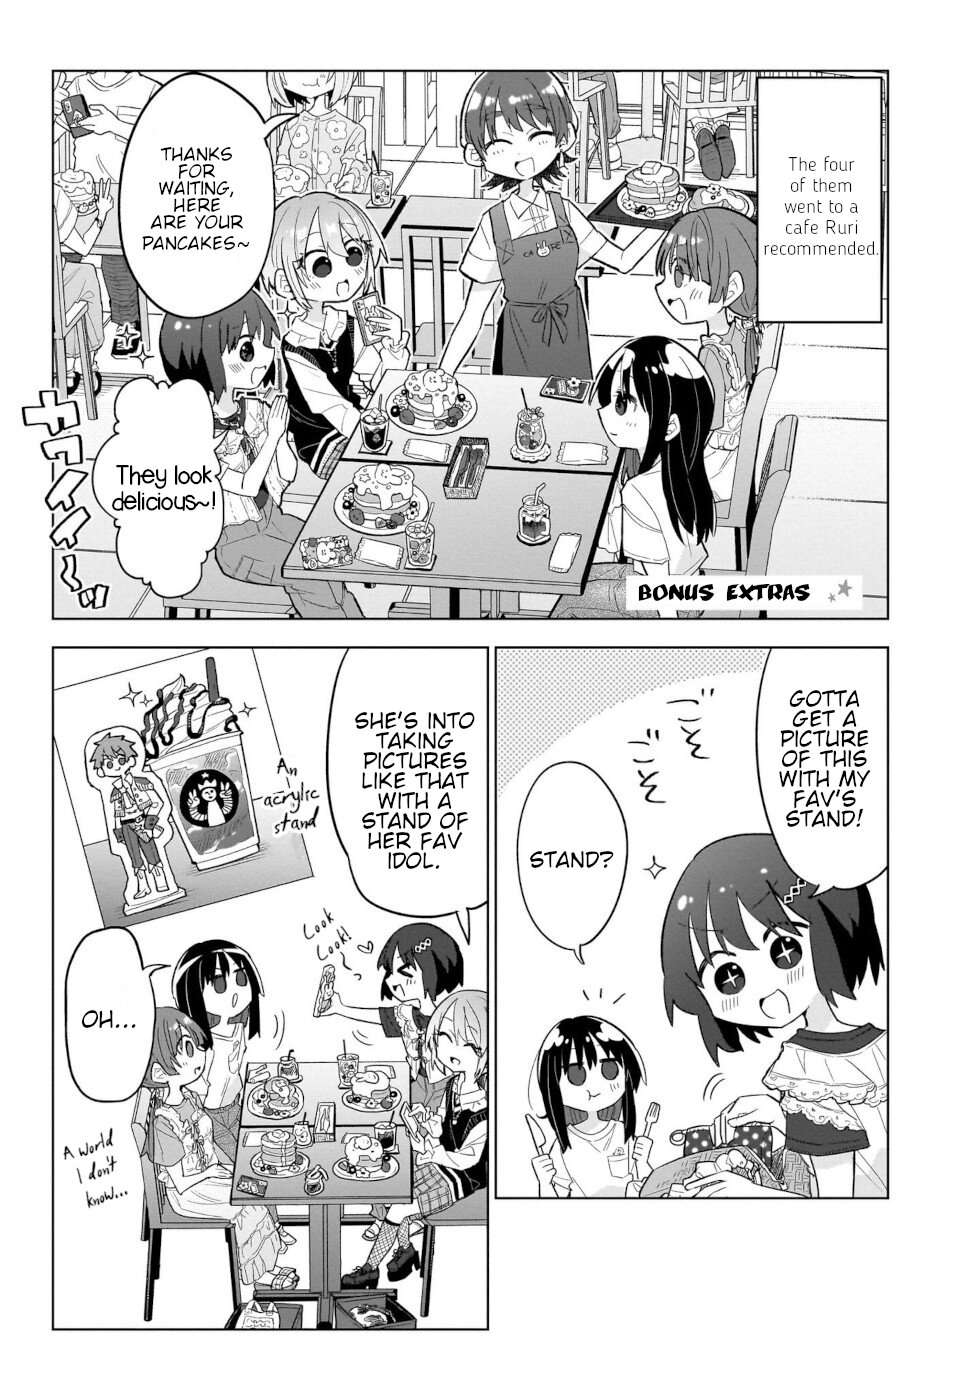 Sweets, Elf, And A High School Girl - chapter 10.5 - #1